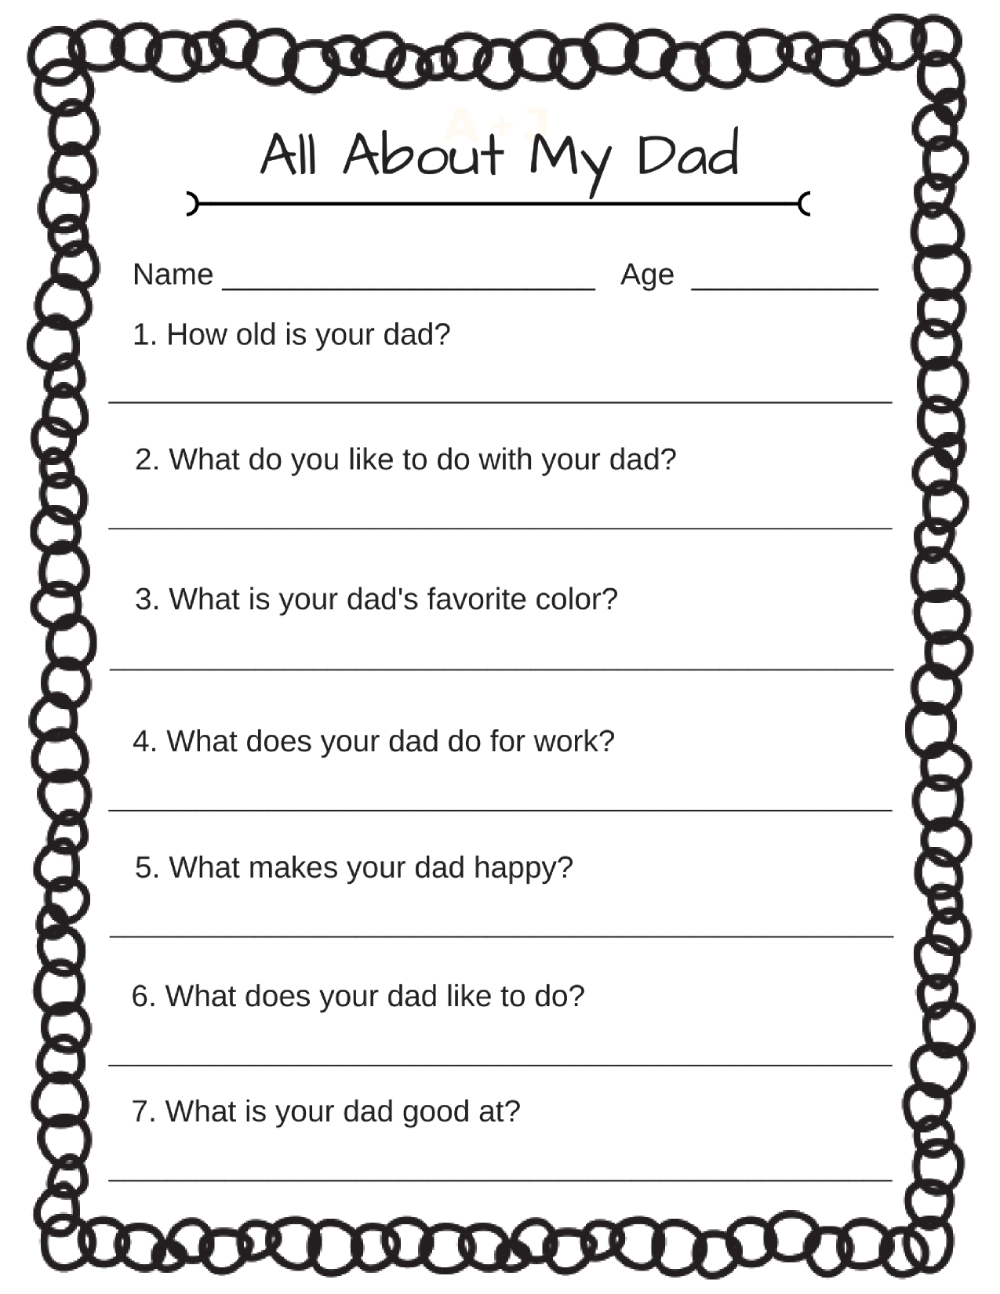 Easy DIY Father's Day Gift: Interview with the Kids! -   17 diy father’s day gifts ideas